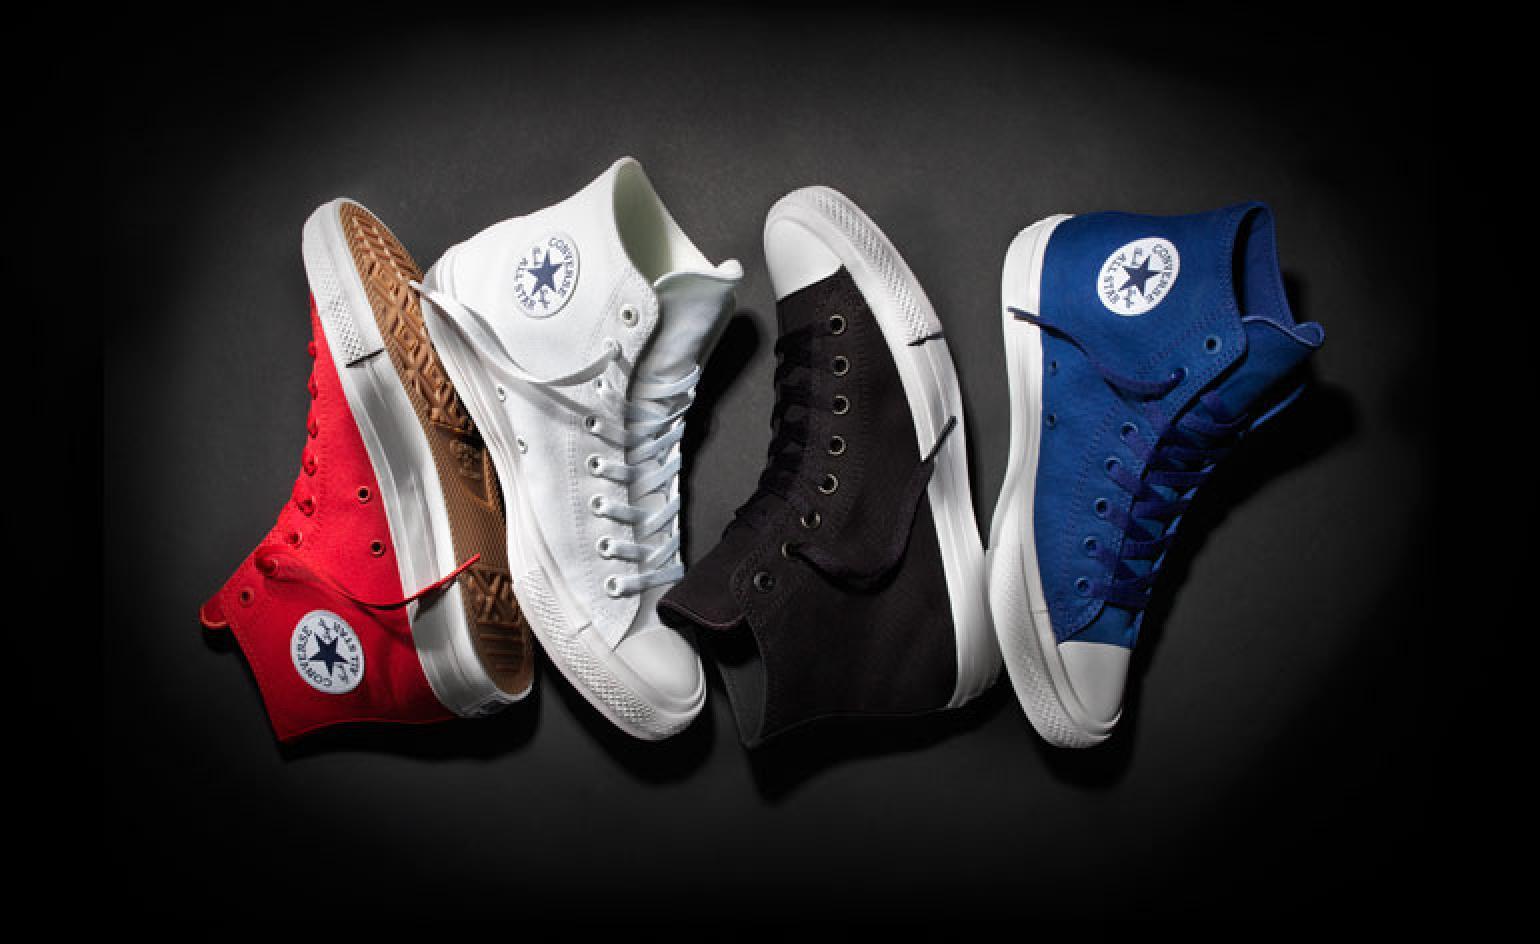 All Star: Converse revamps its iconic Chuck Taylor sneakers